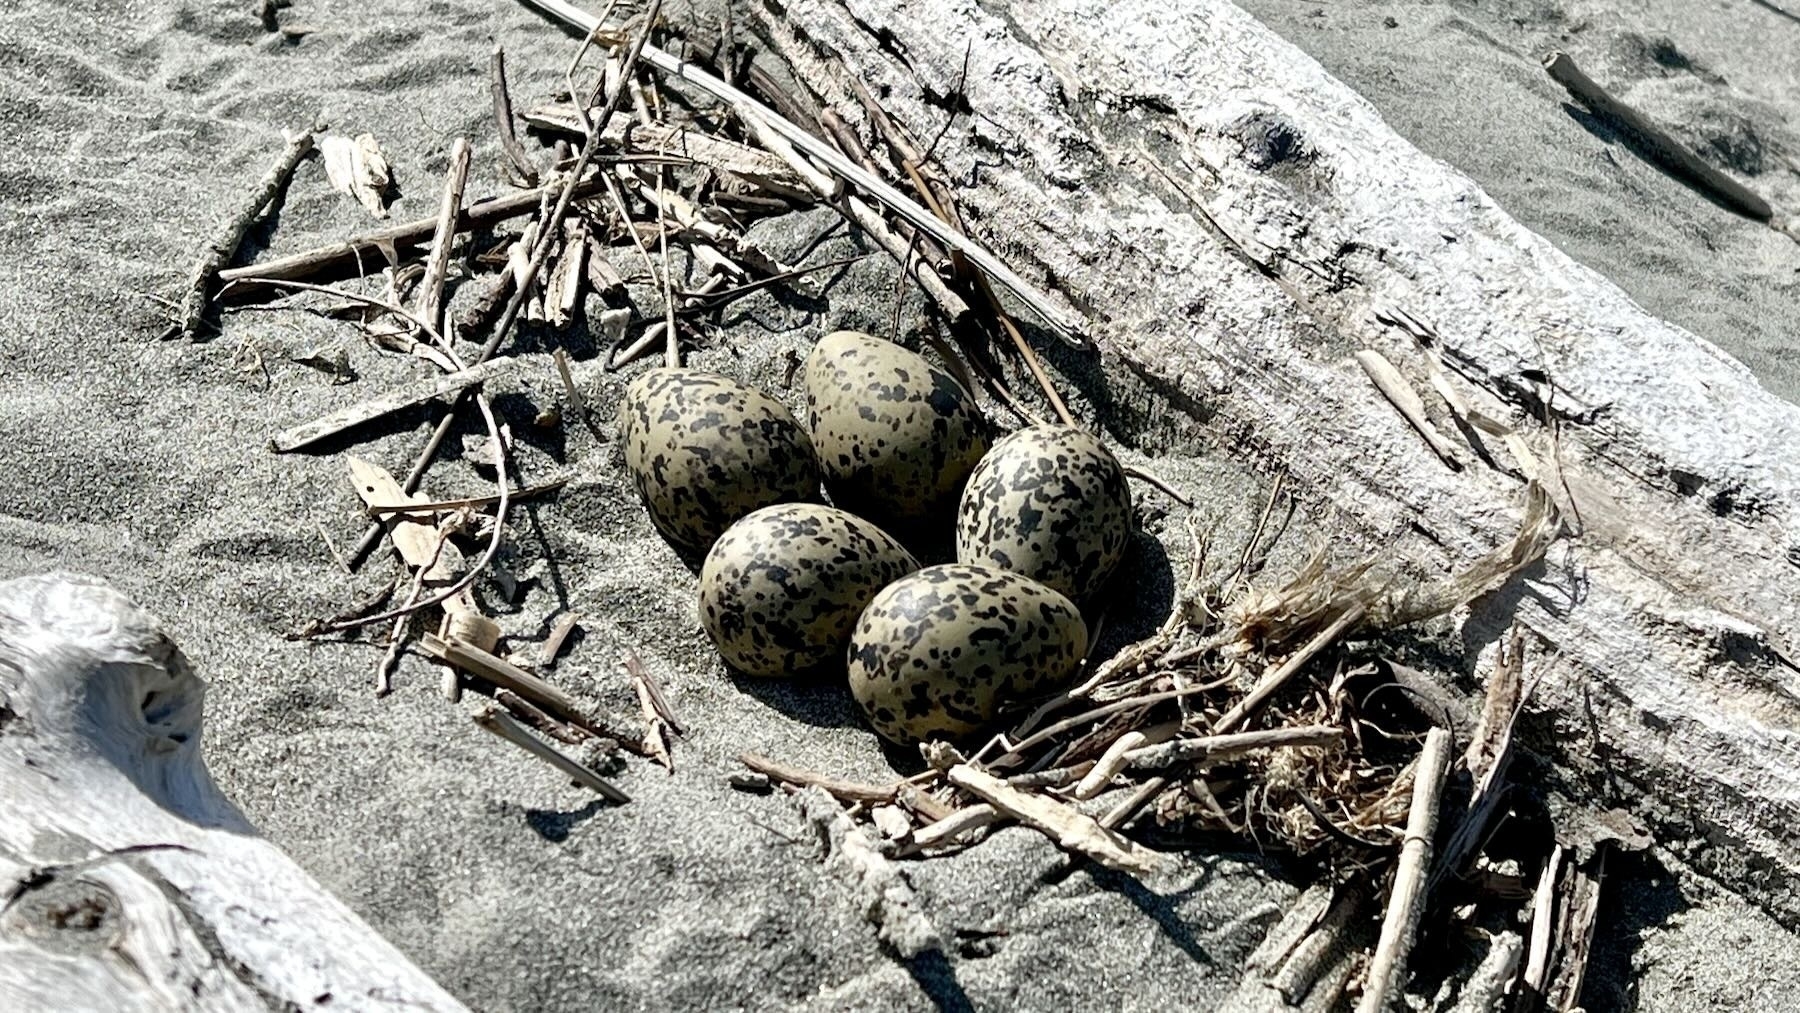 5 speckled Oystercatcher or Pied Stilt eggs near a piece of driftwood in November 2022.